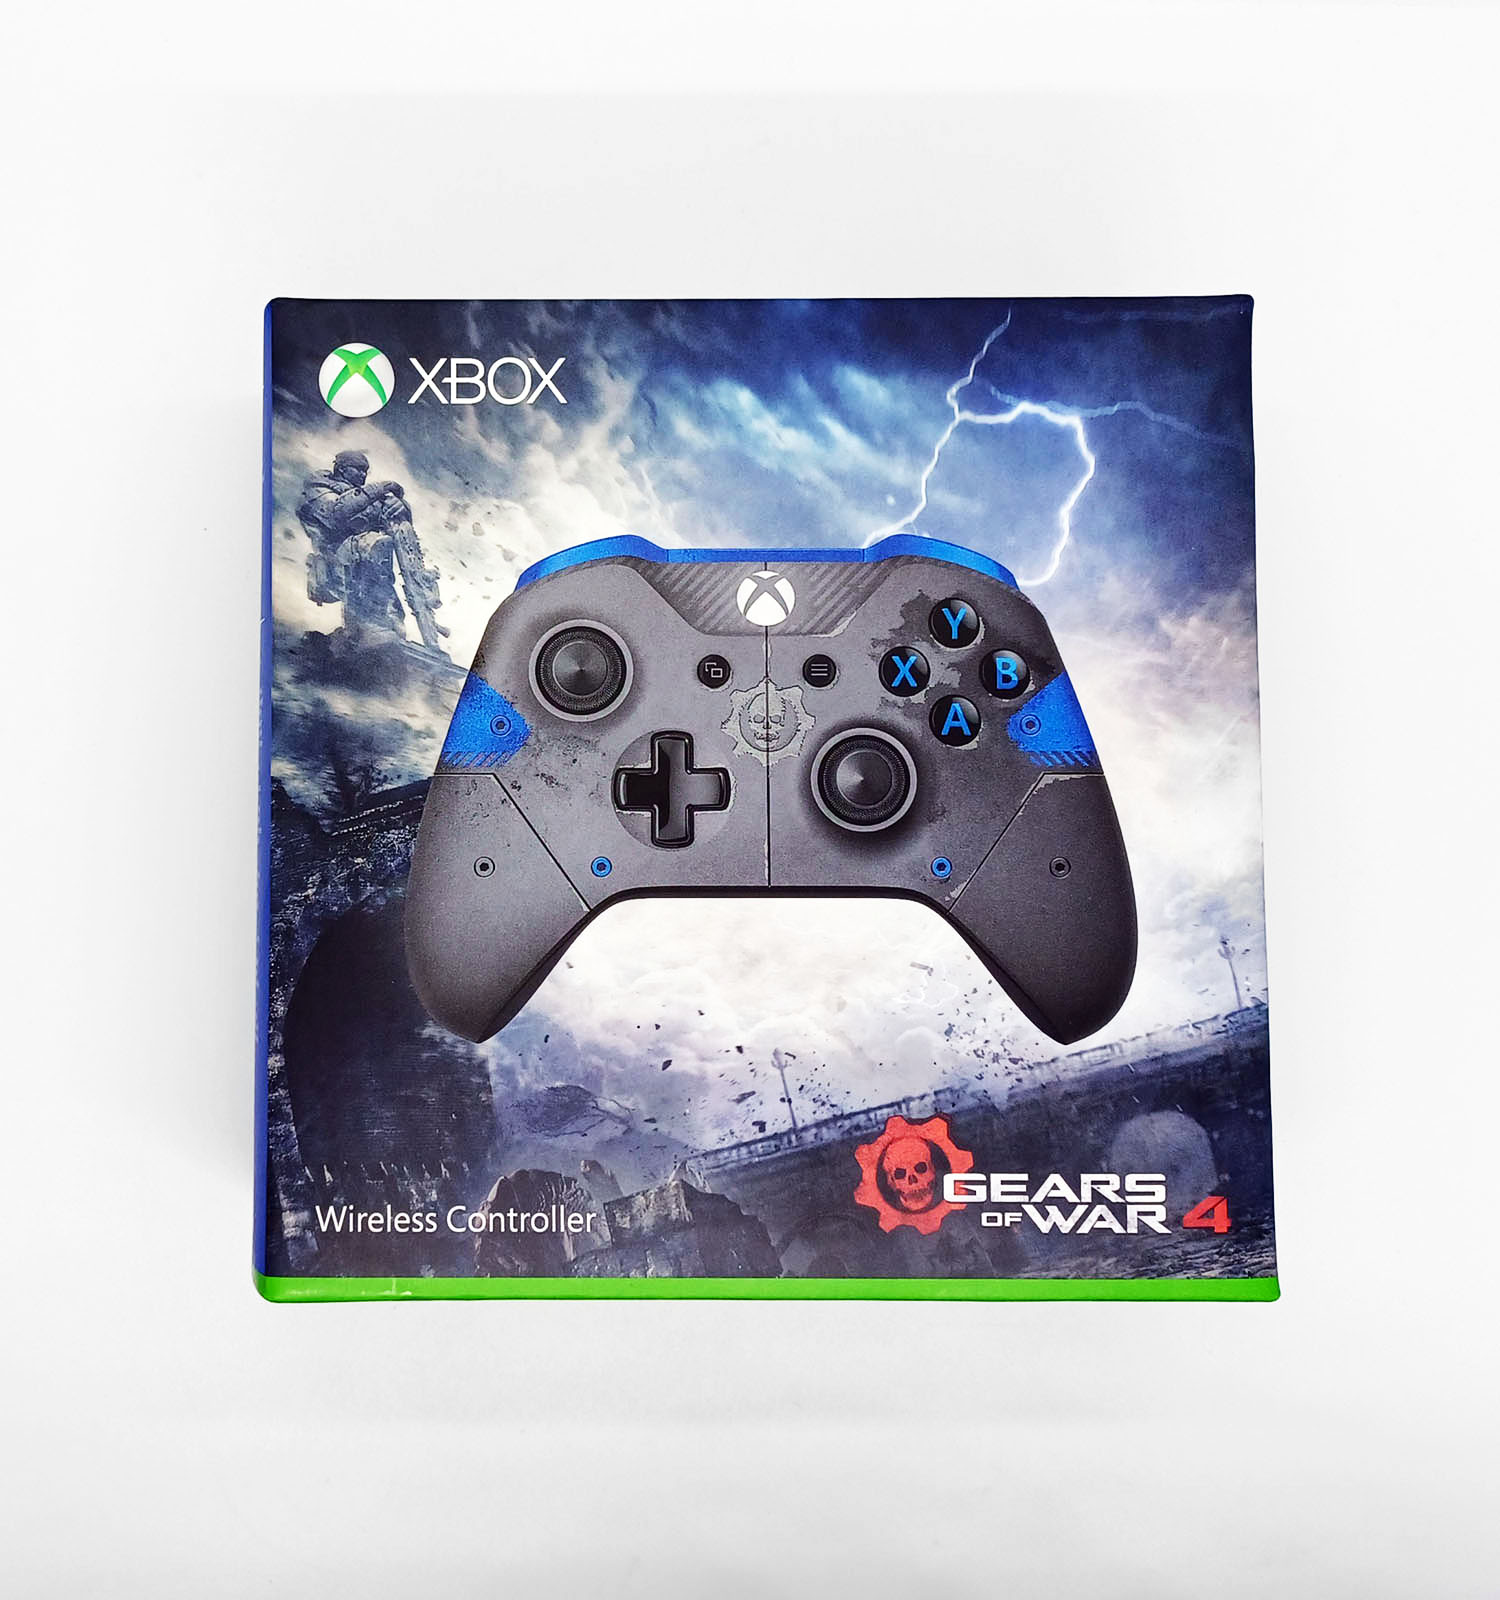 Manette Xbox One - Edition limitée Gears of war 4 - Exclu web